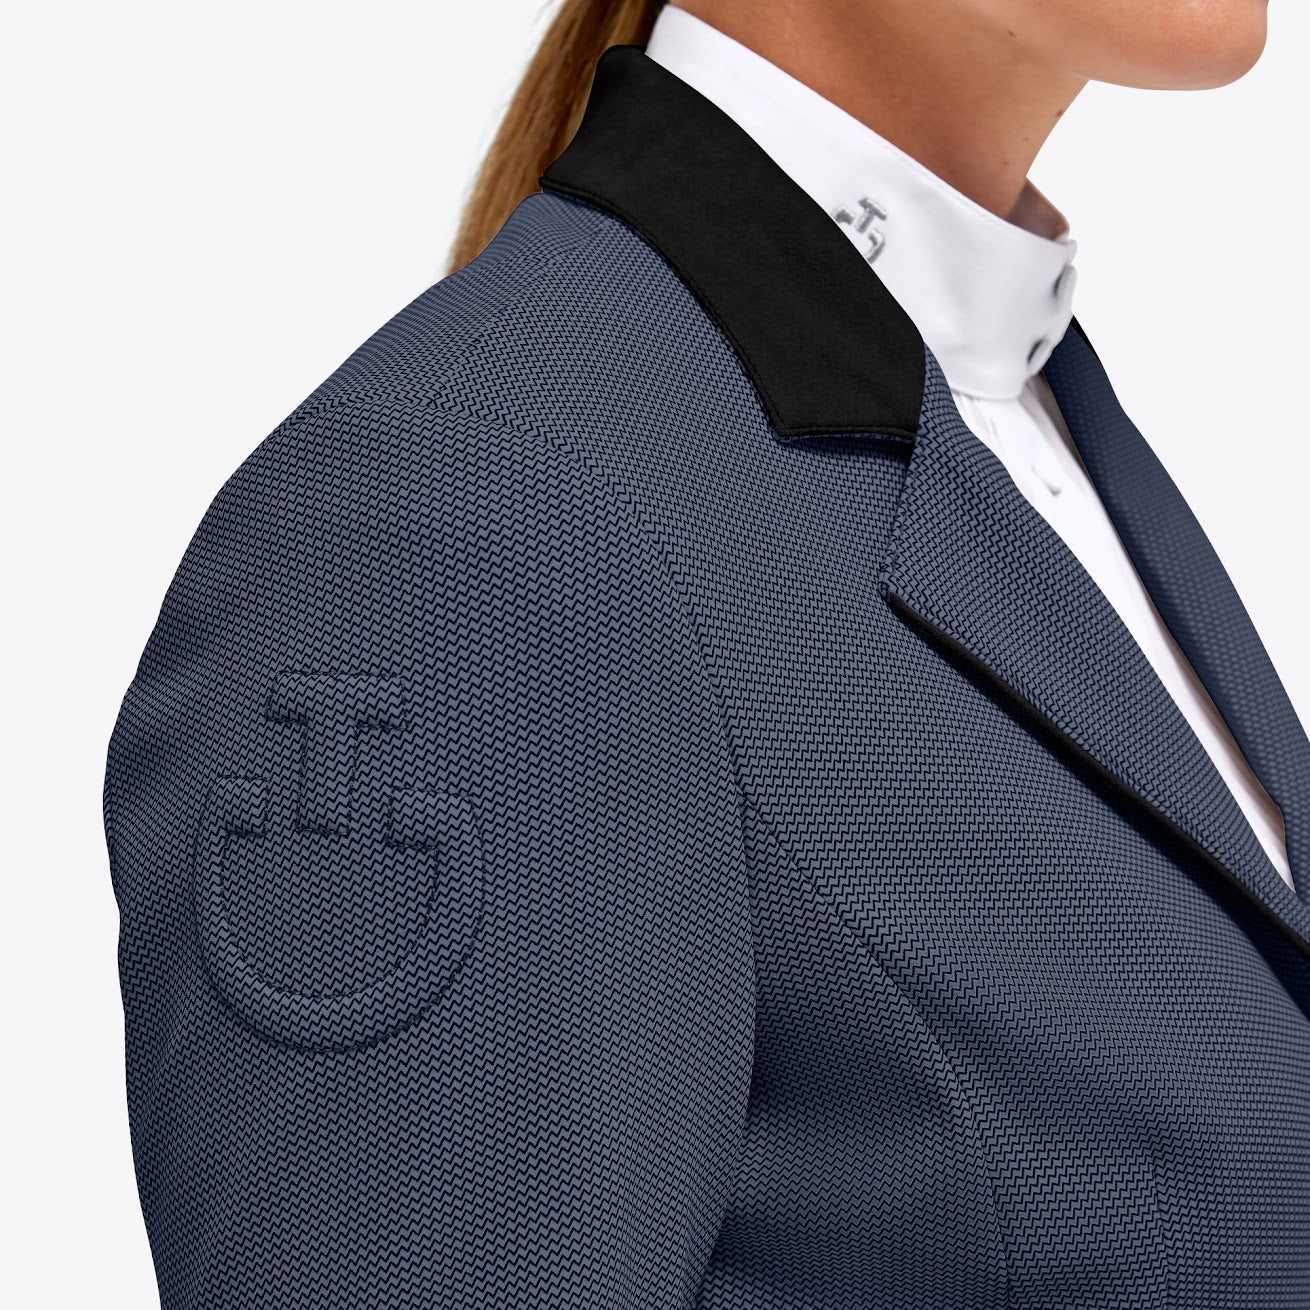 The Cavalleria Toscana classic GP competition riding jacket in the new shade of blue 7J00.